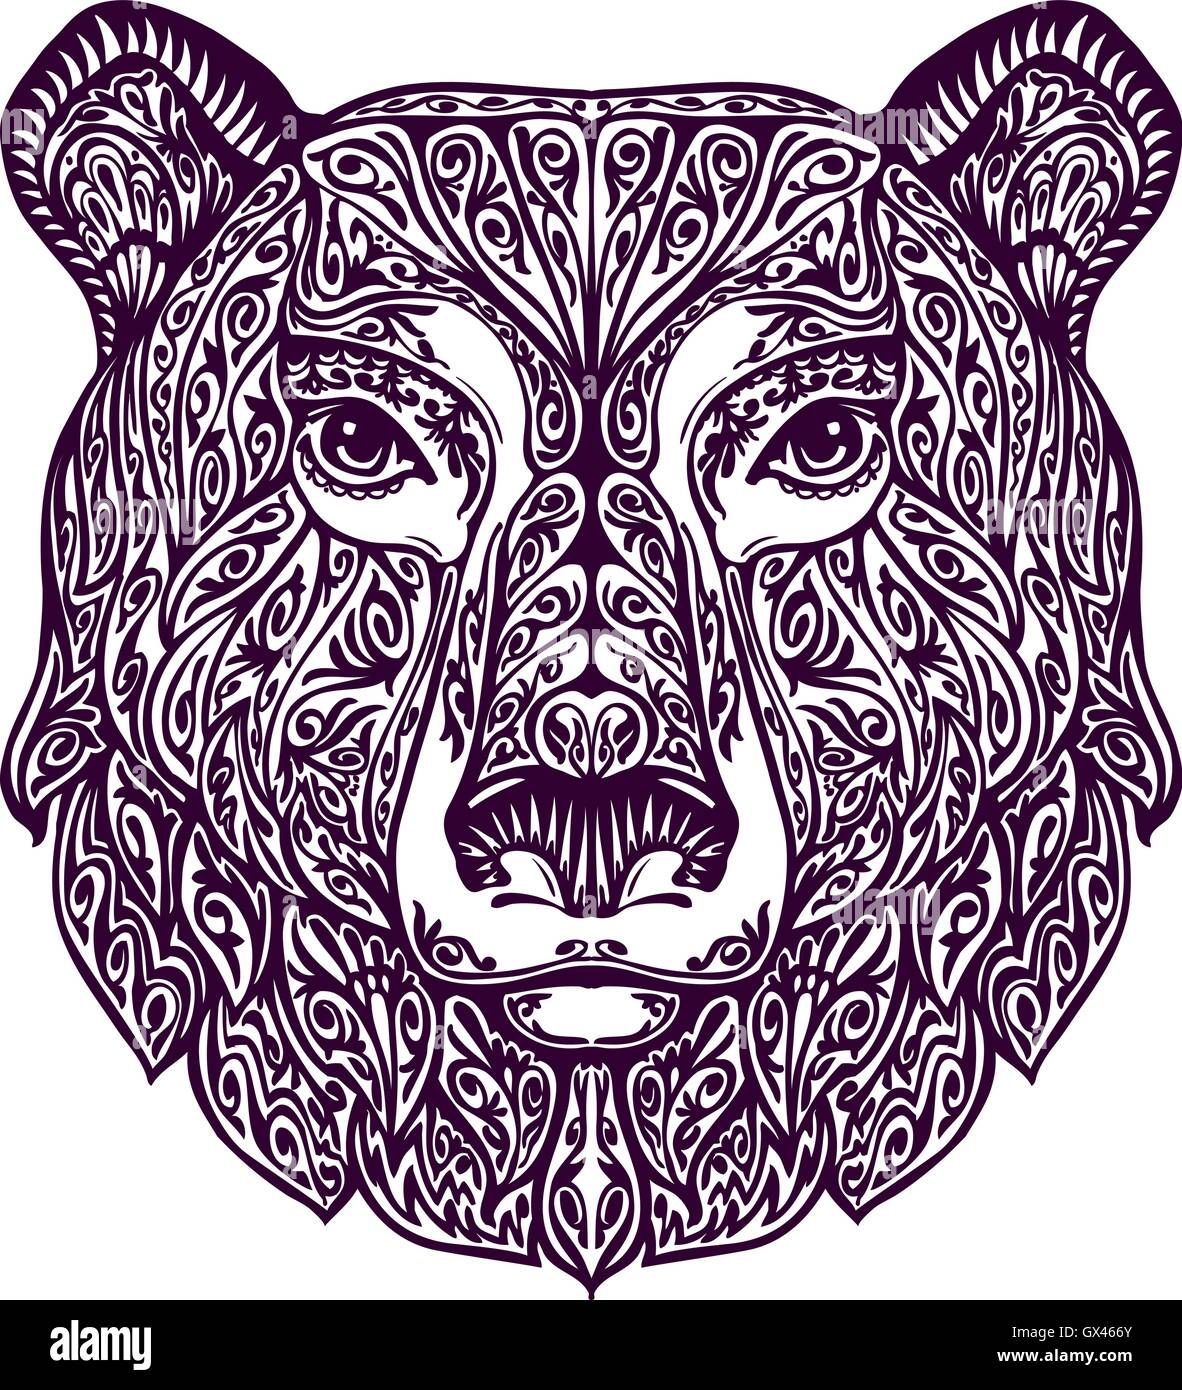 Ethnic ornamented bear. Hand drawn vector illustration with floral elements Stock Vector